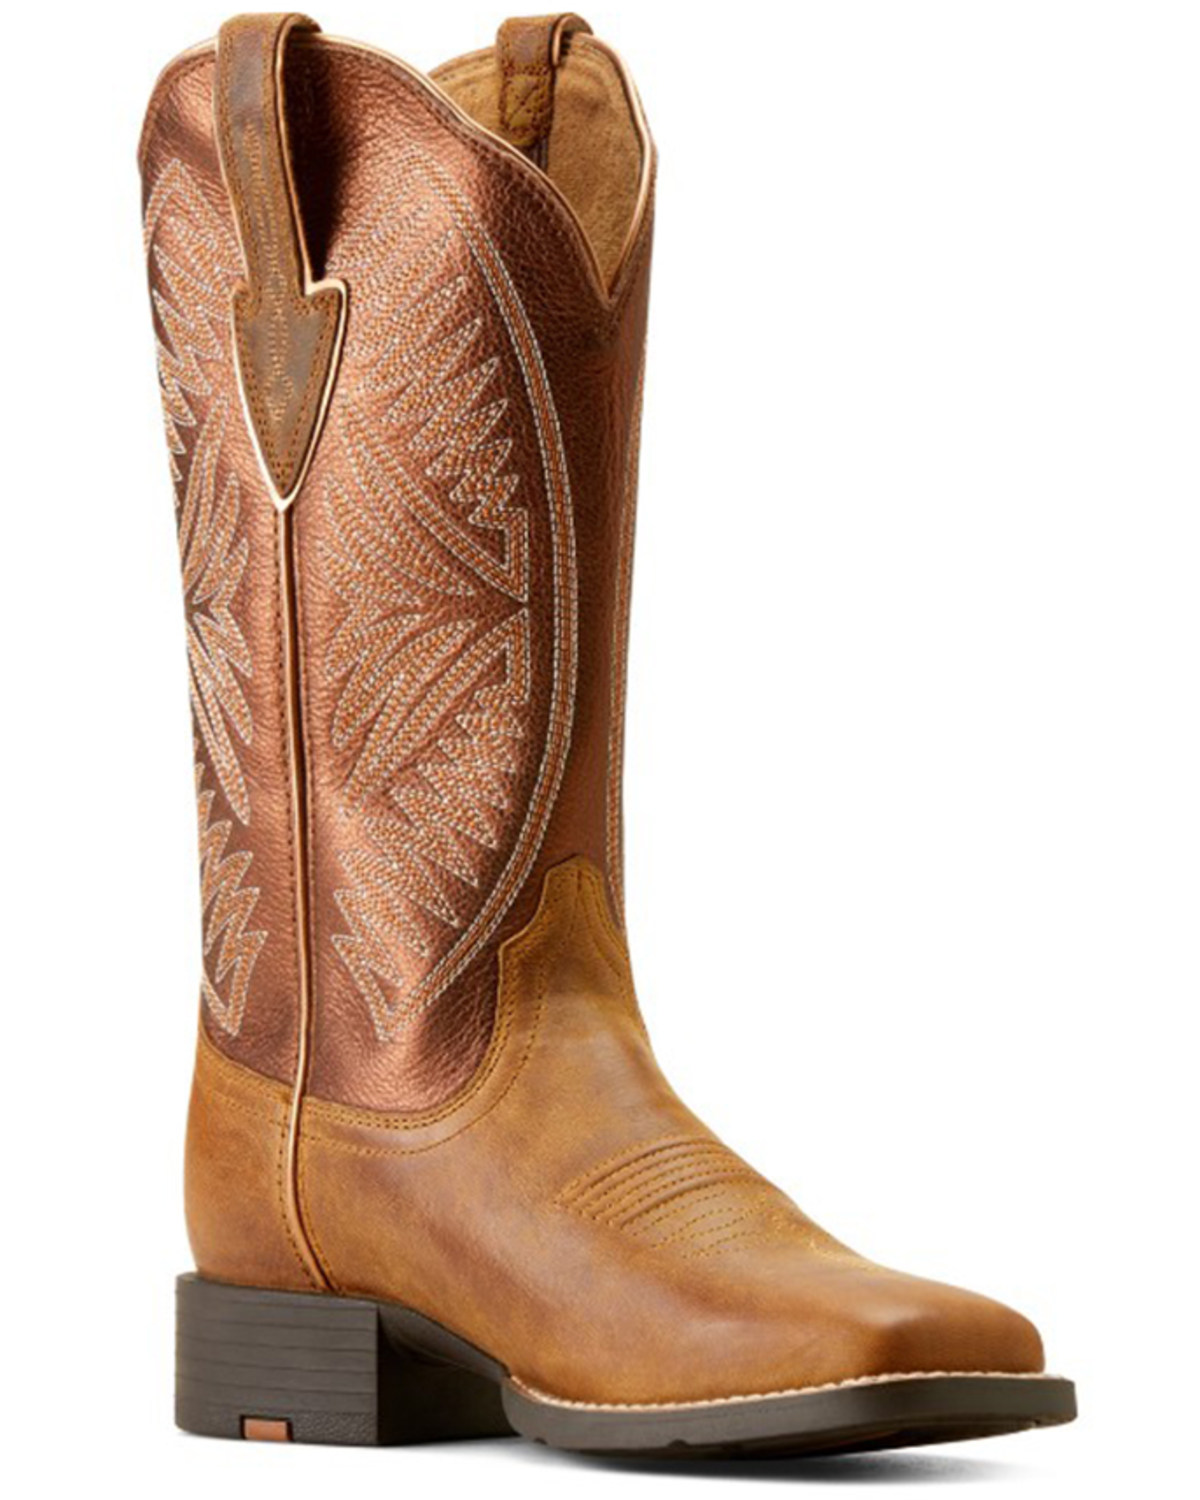 Ariat Women's Round Up Ruidoso Performance Western Boots - Broad Square Toe